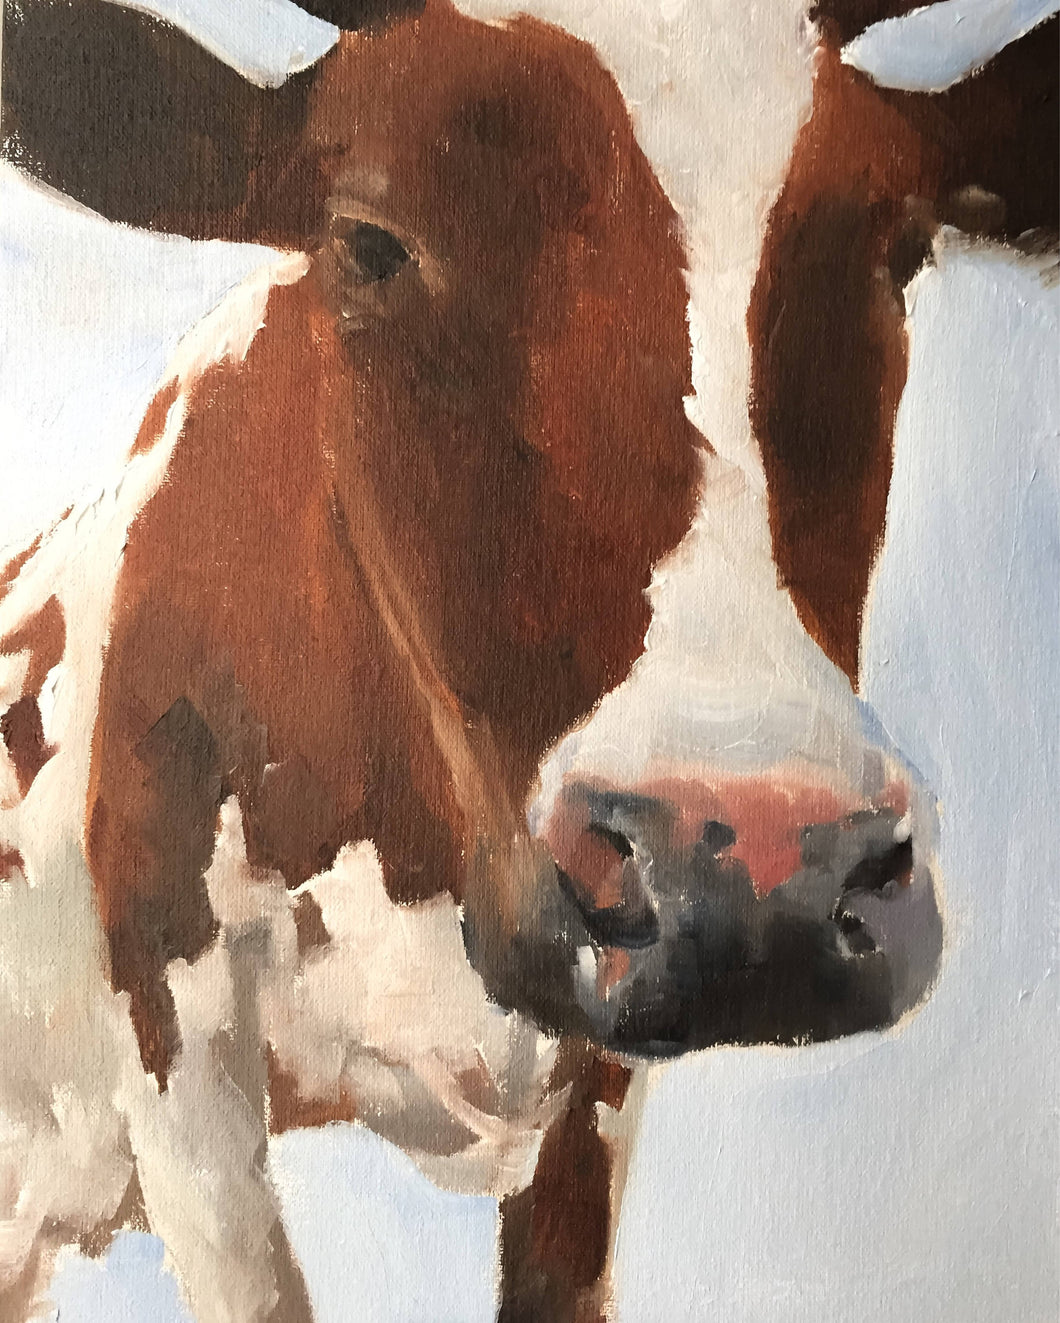 Cow Painting, PRINTS, Canvas, Posters, Originals, Commissions - Fine Art, from original oil painting by James Coates